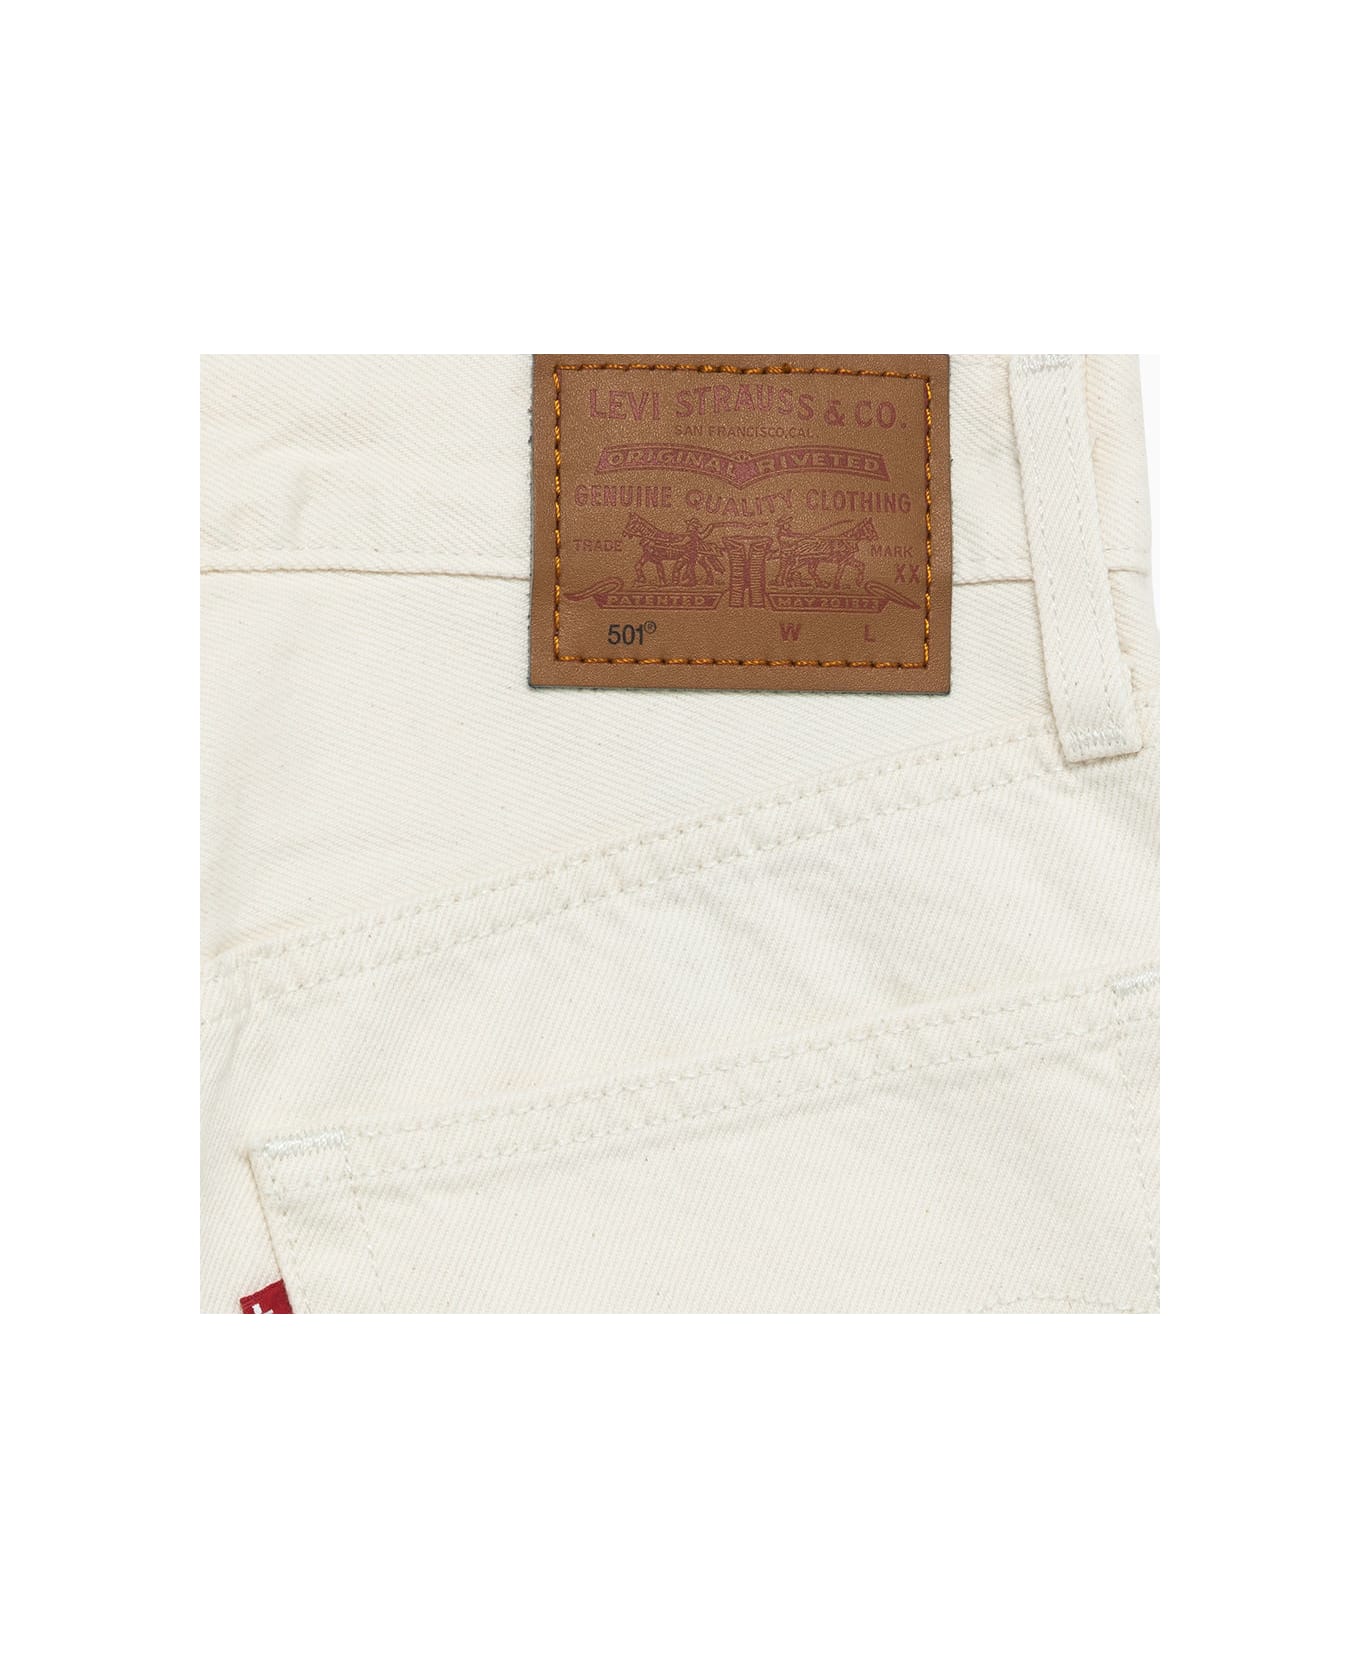 Levi's Levis 501 Cropped Jeans - Bianco ボトムス